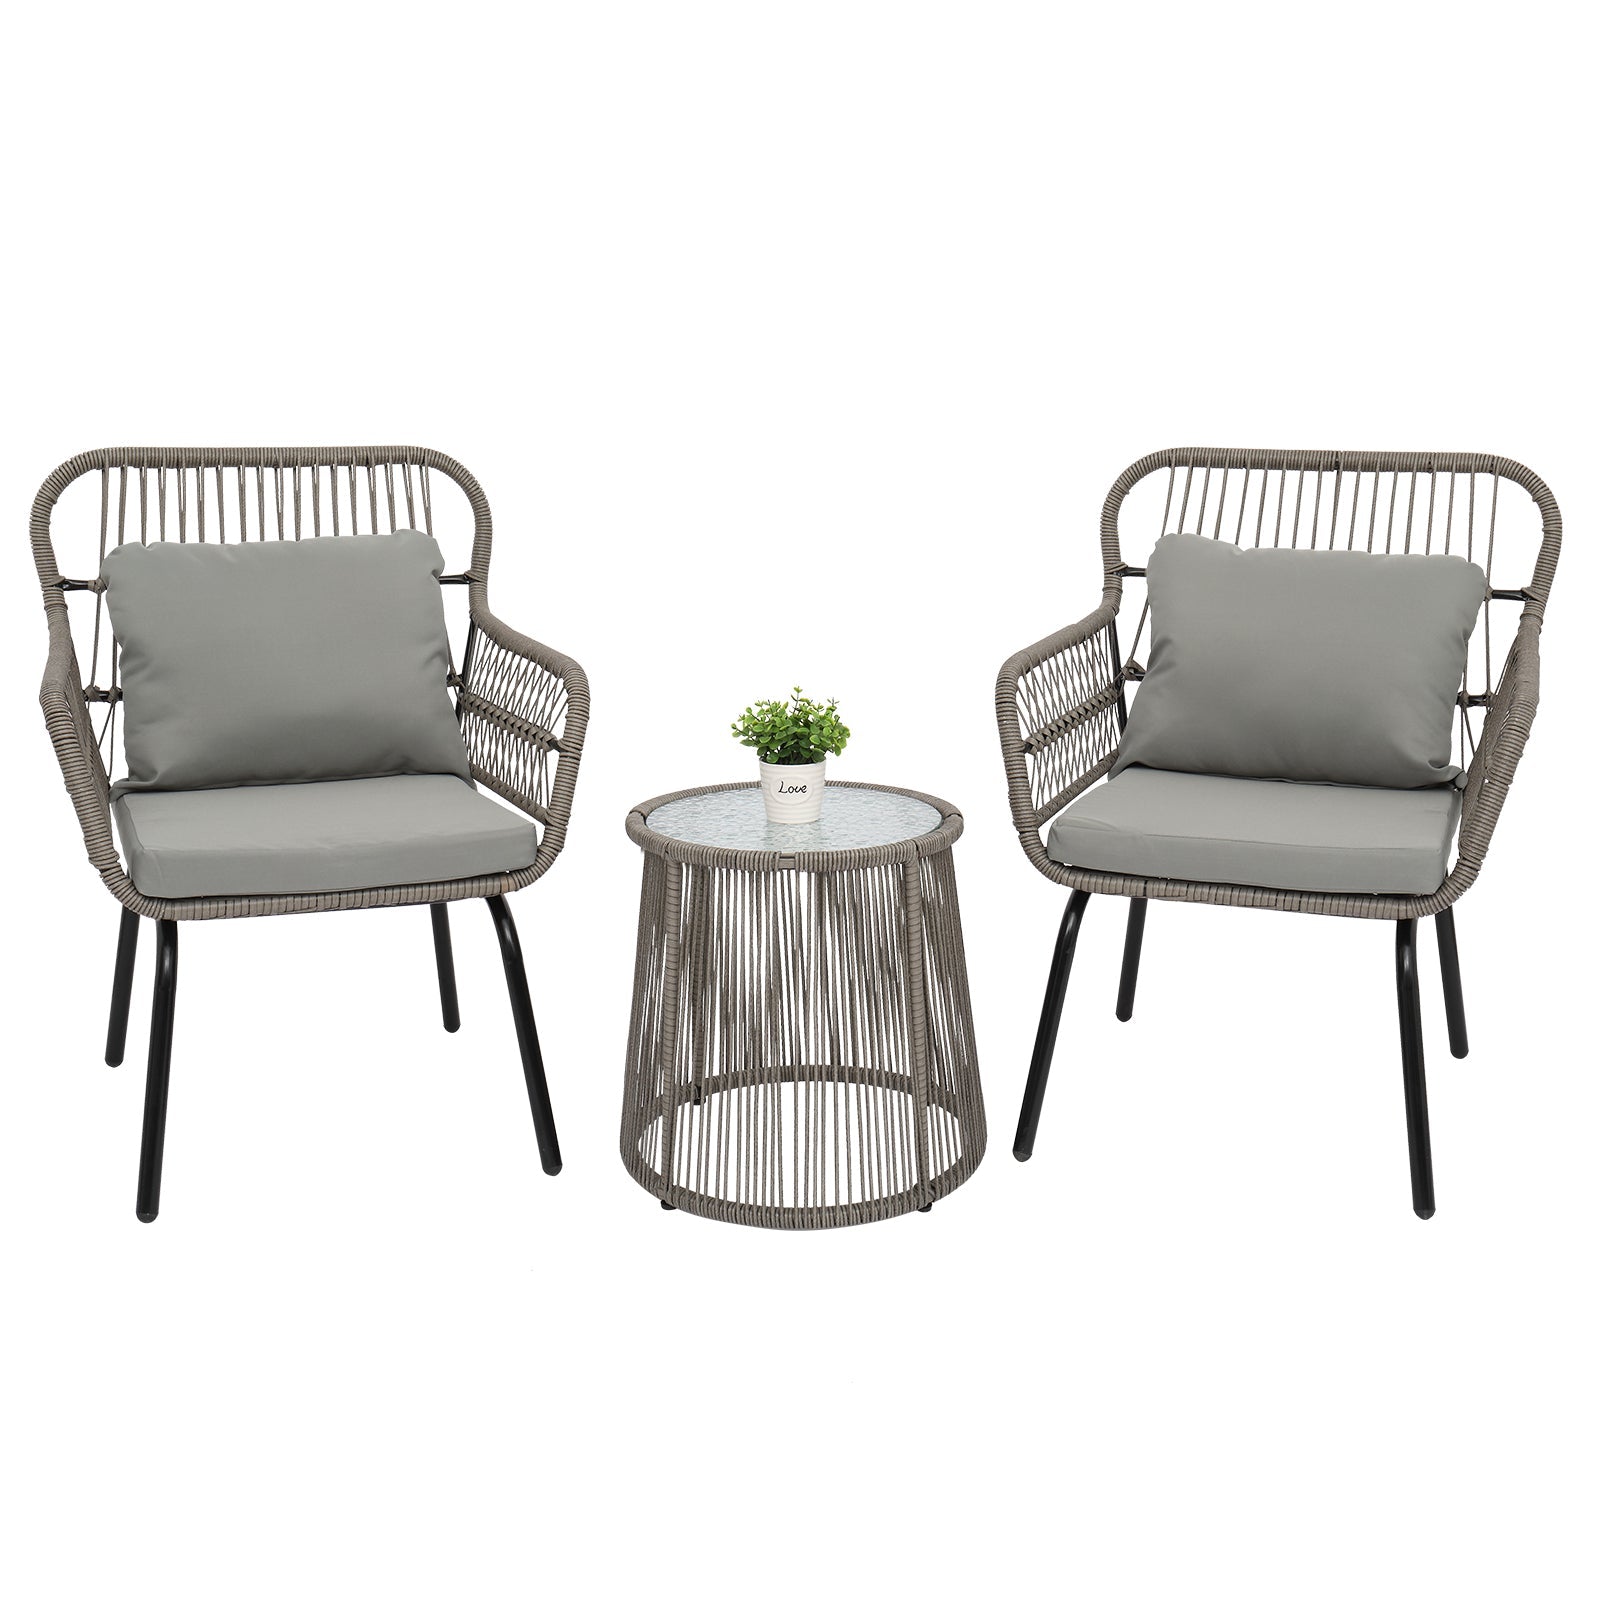 ALICIAN 3 Pcs/set Patio Table Chair Set Outdoor Single Chair + Coffee Table Grey